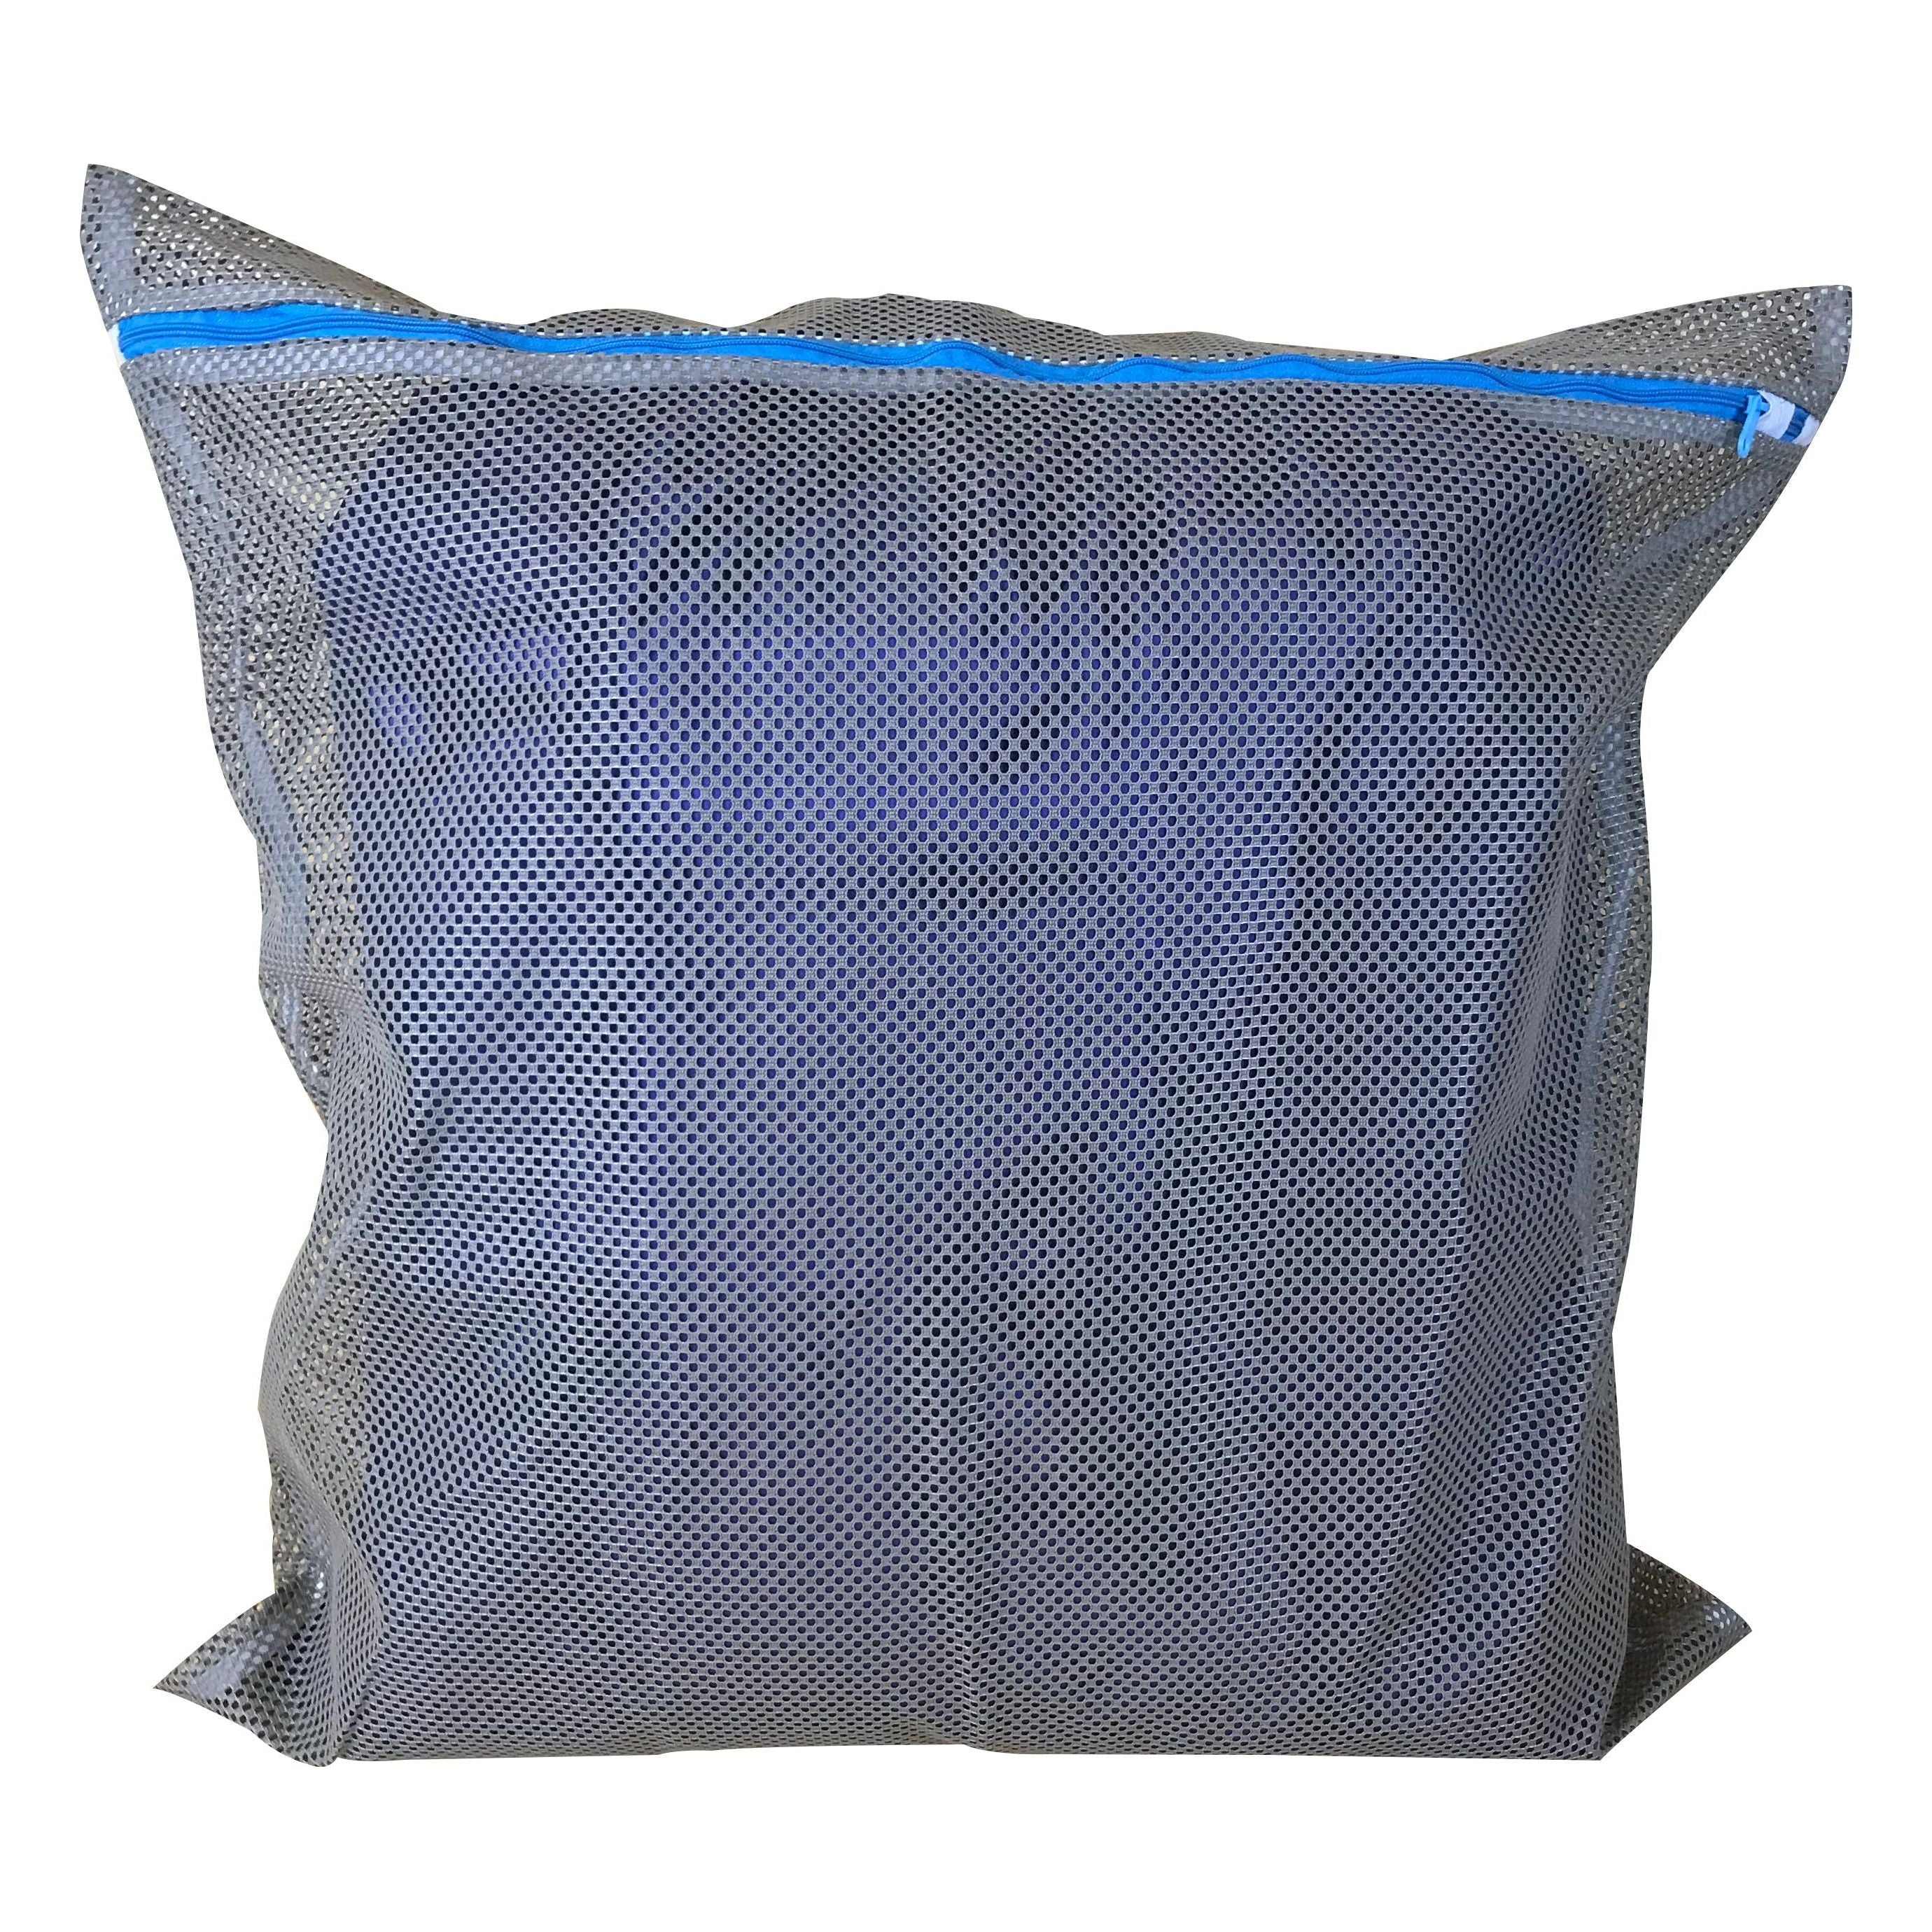 24" x 25 " Heavy Mesh Bags with Blue zipper, Color - Beige, 40 pieces/box, Sold by the Box, Price for 1 bag - $1.05 each bag